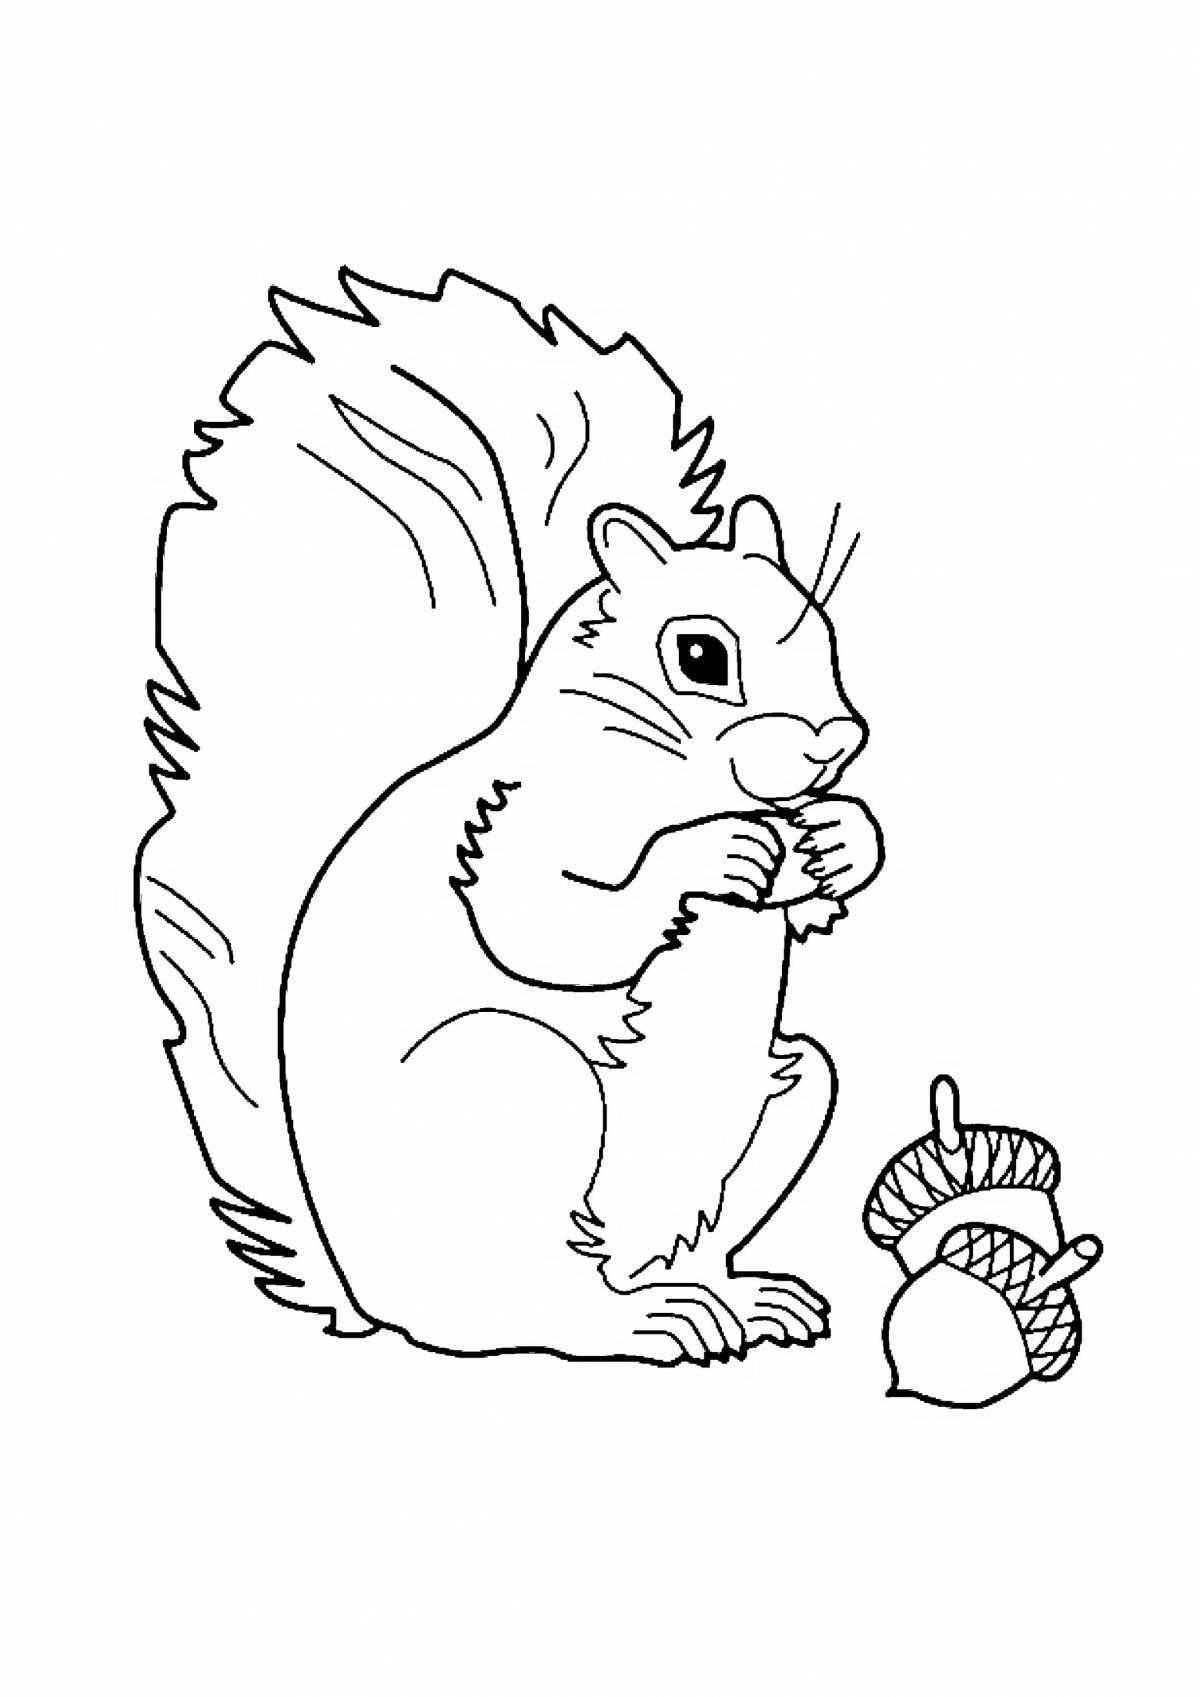 Grinning squirrel with bump